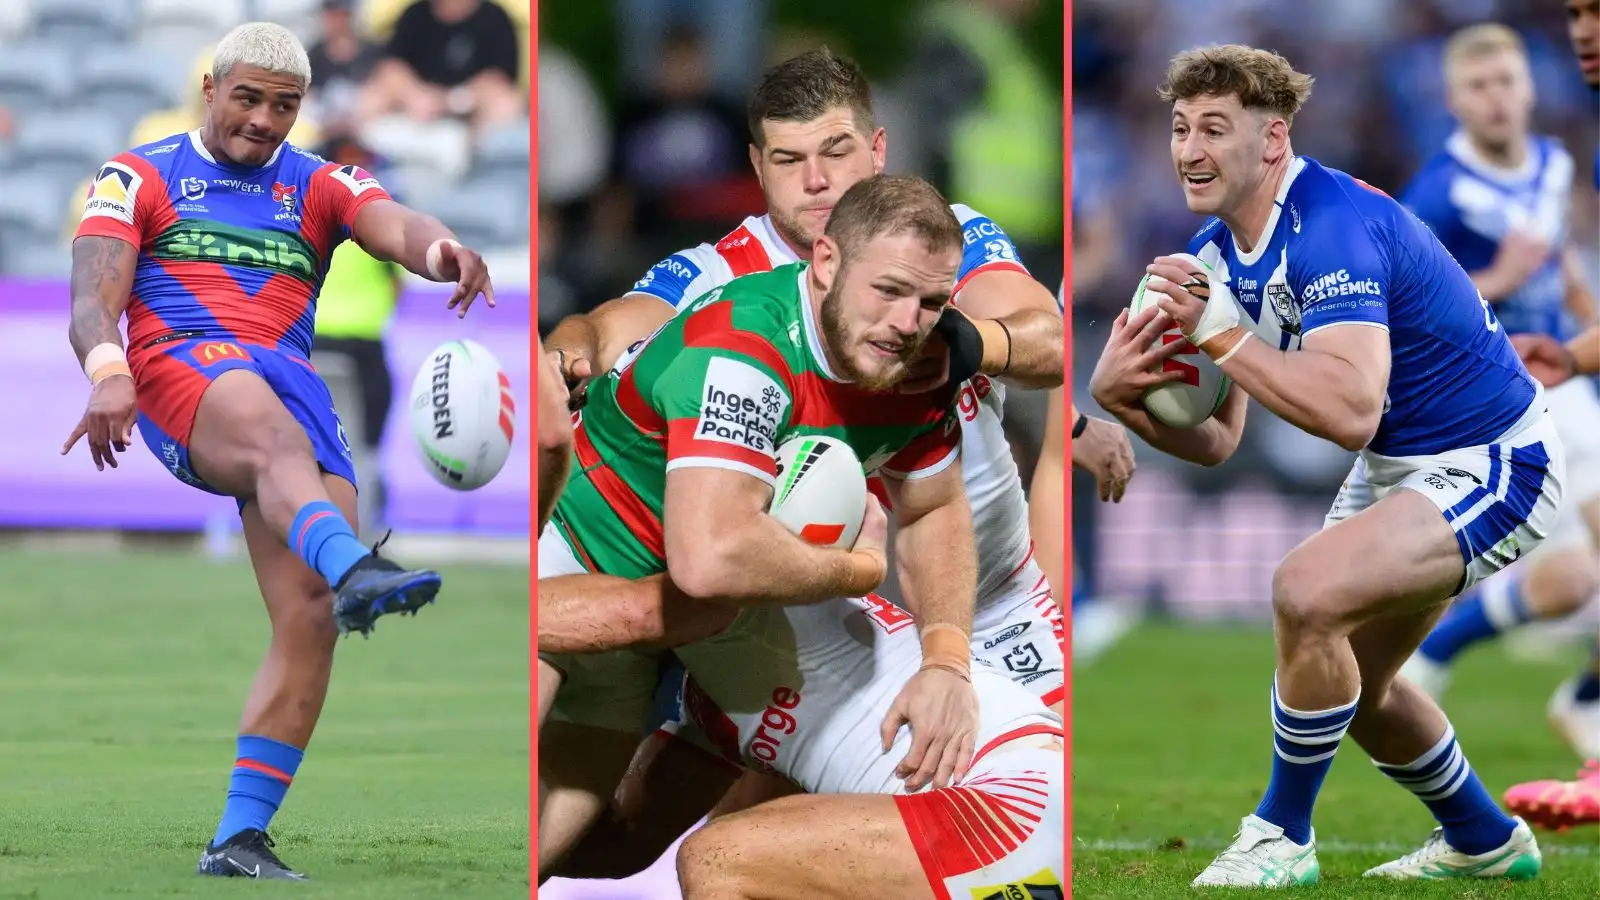 Brits Down Under: Will Pryce scores points again, Tom Burgess’ perfect tackling, Max King’s enormous effort